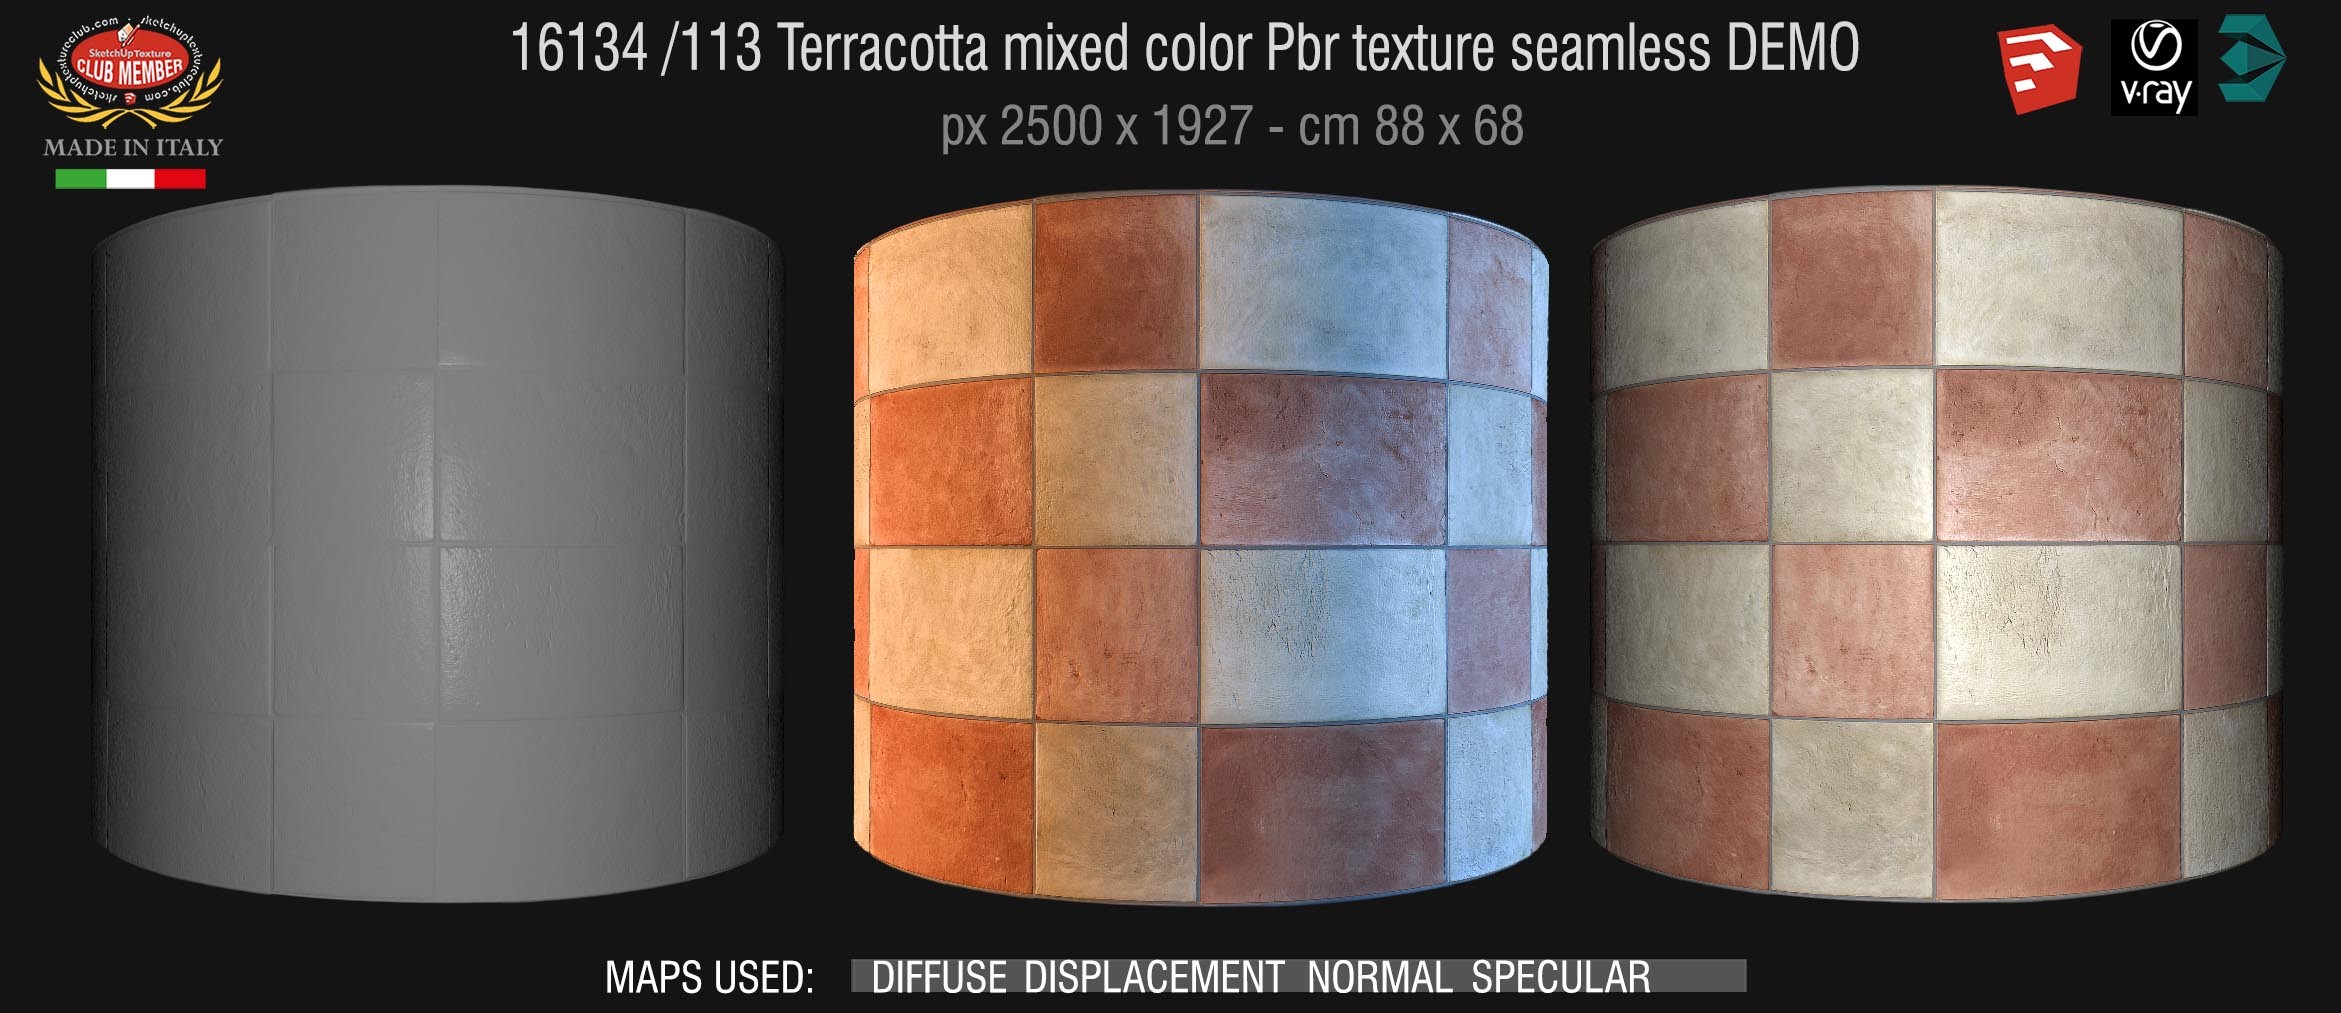 16134_Terracotta mixed color pbr tile texture seamless DEMO